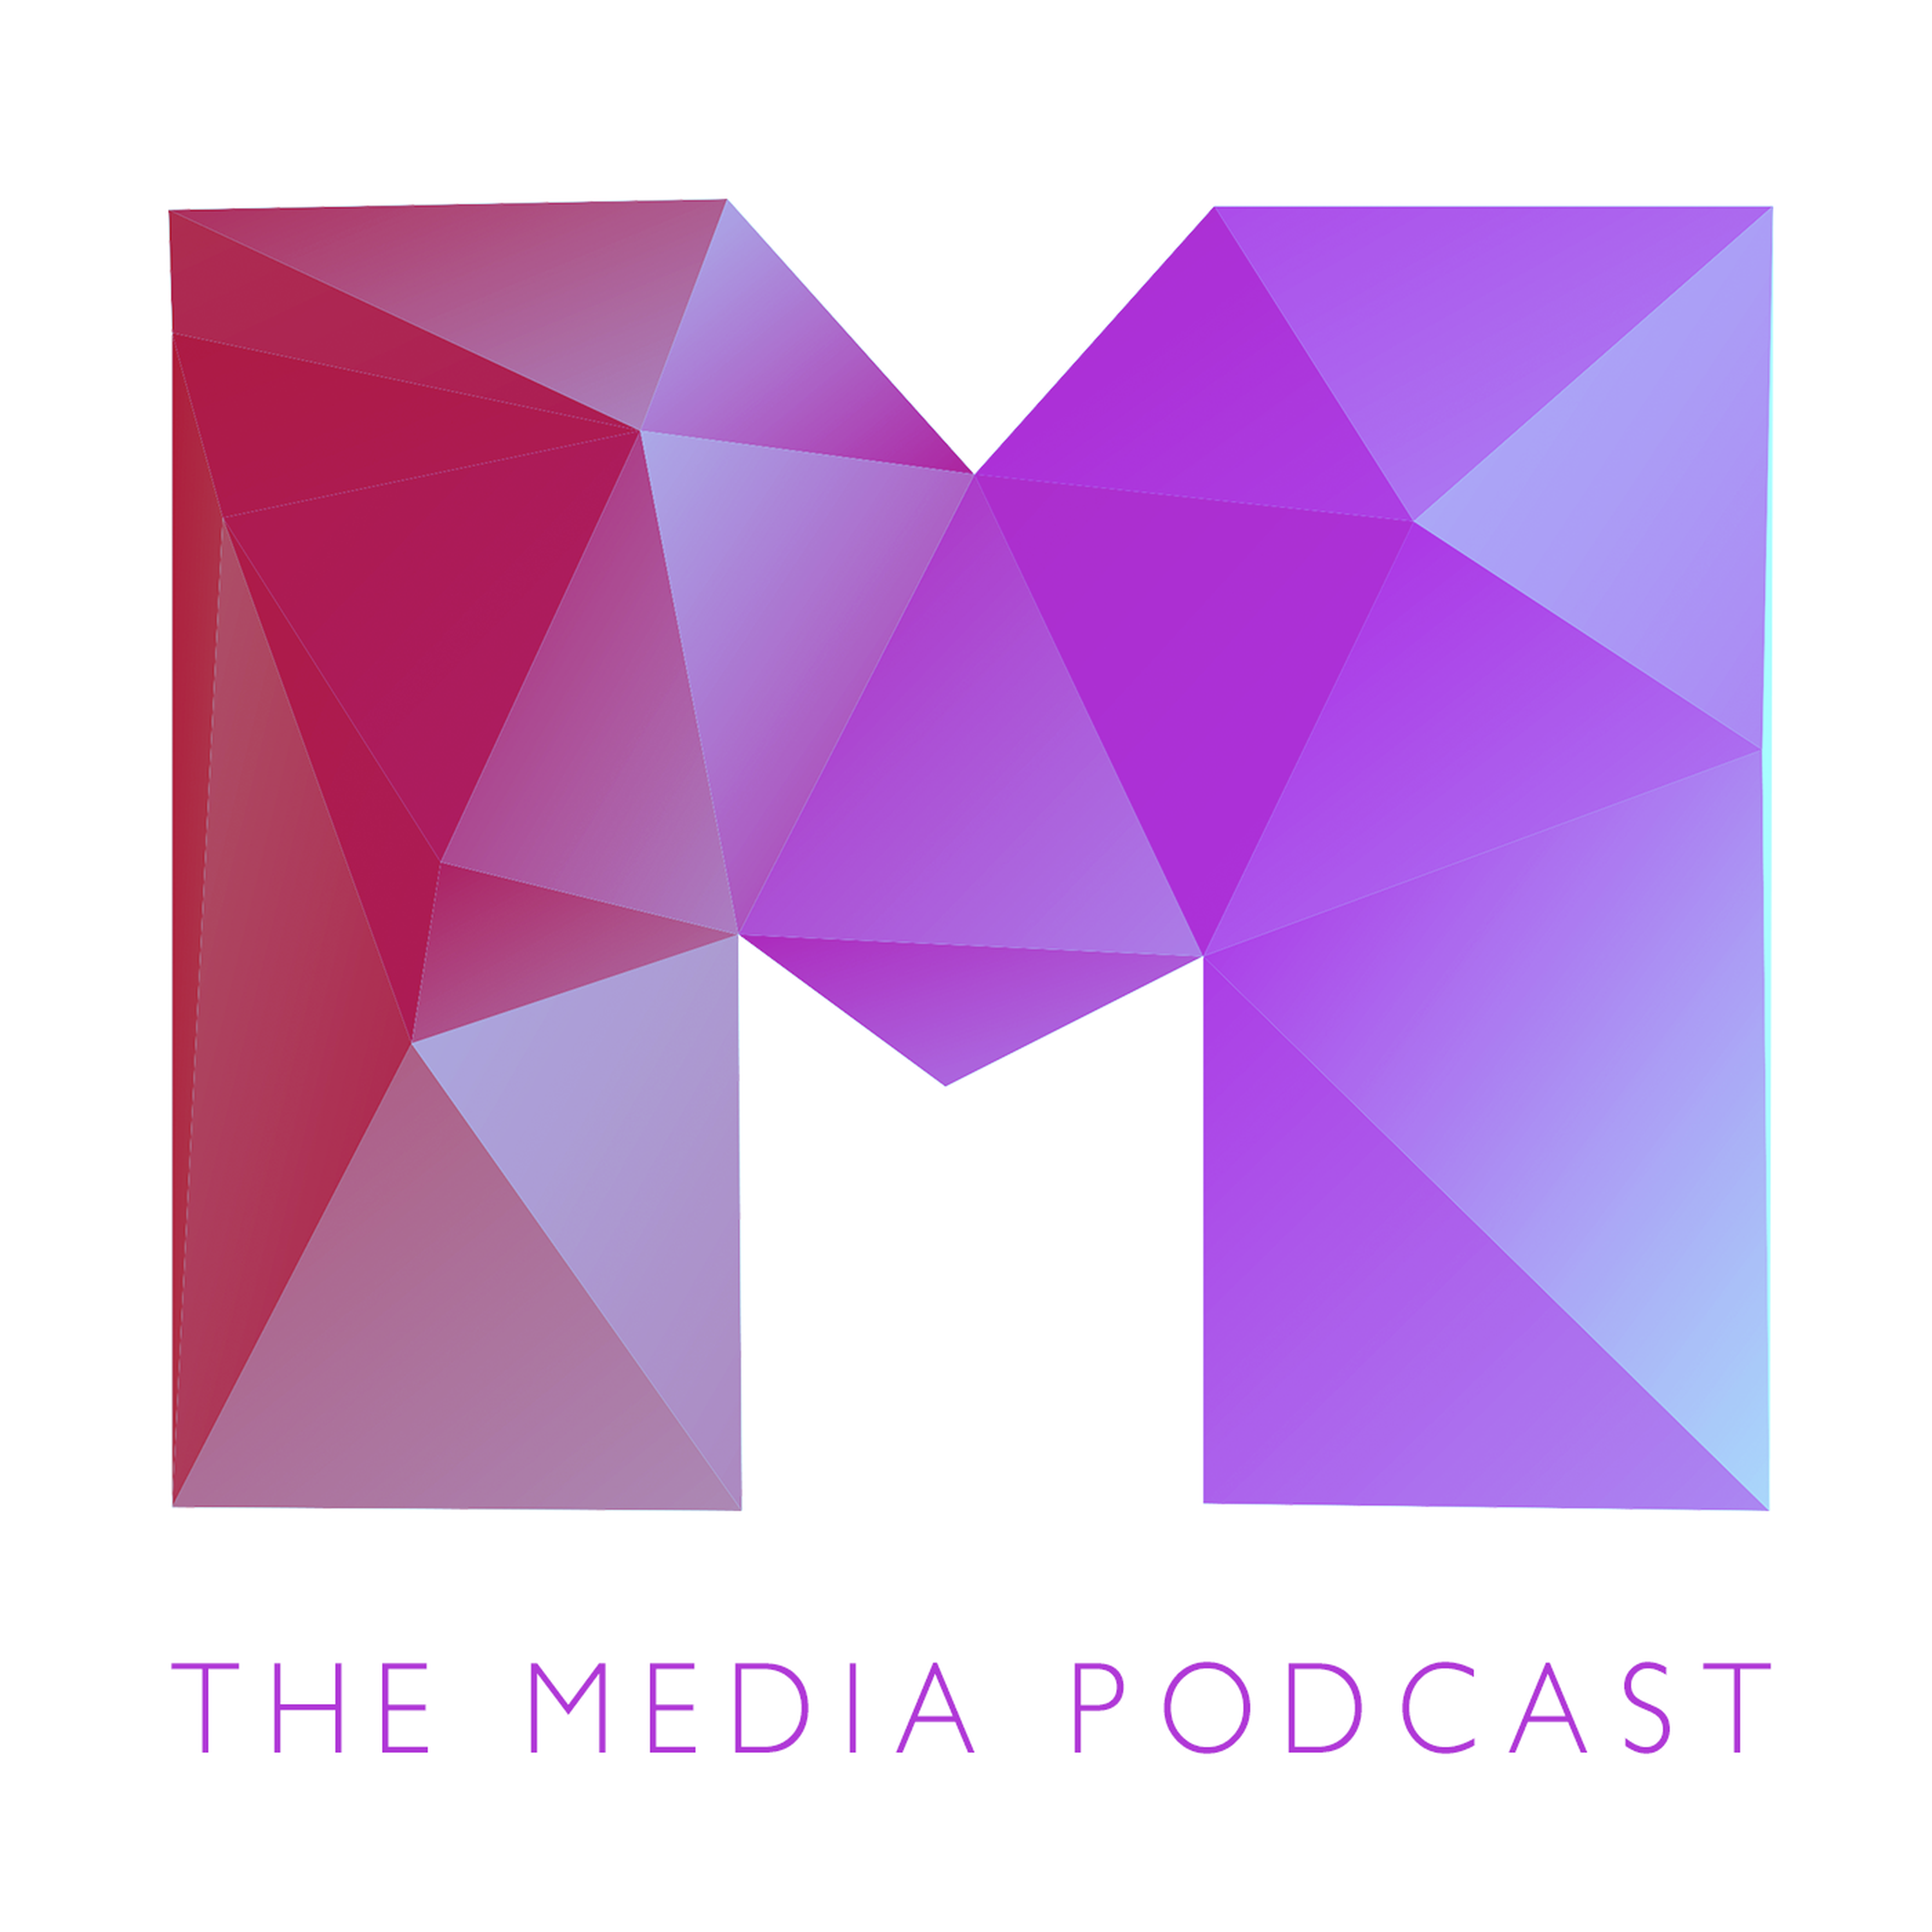 #34 - BBC debate begins, Quirker launch & Moyles on XFM - The Media Podcast with Olly Mann